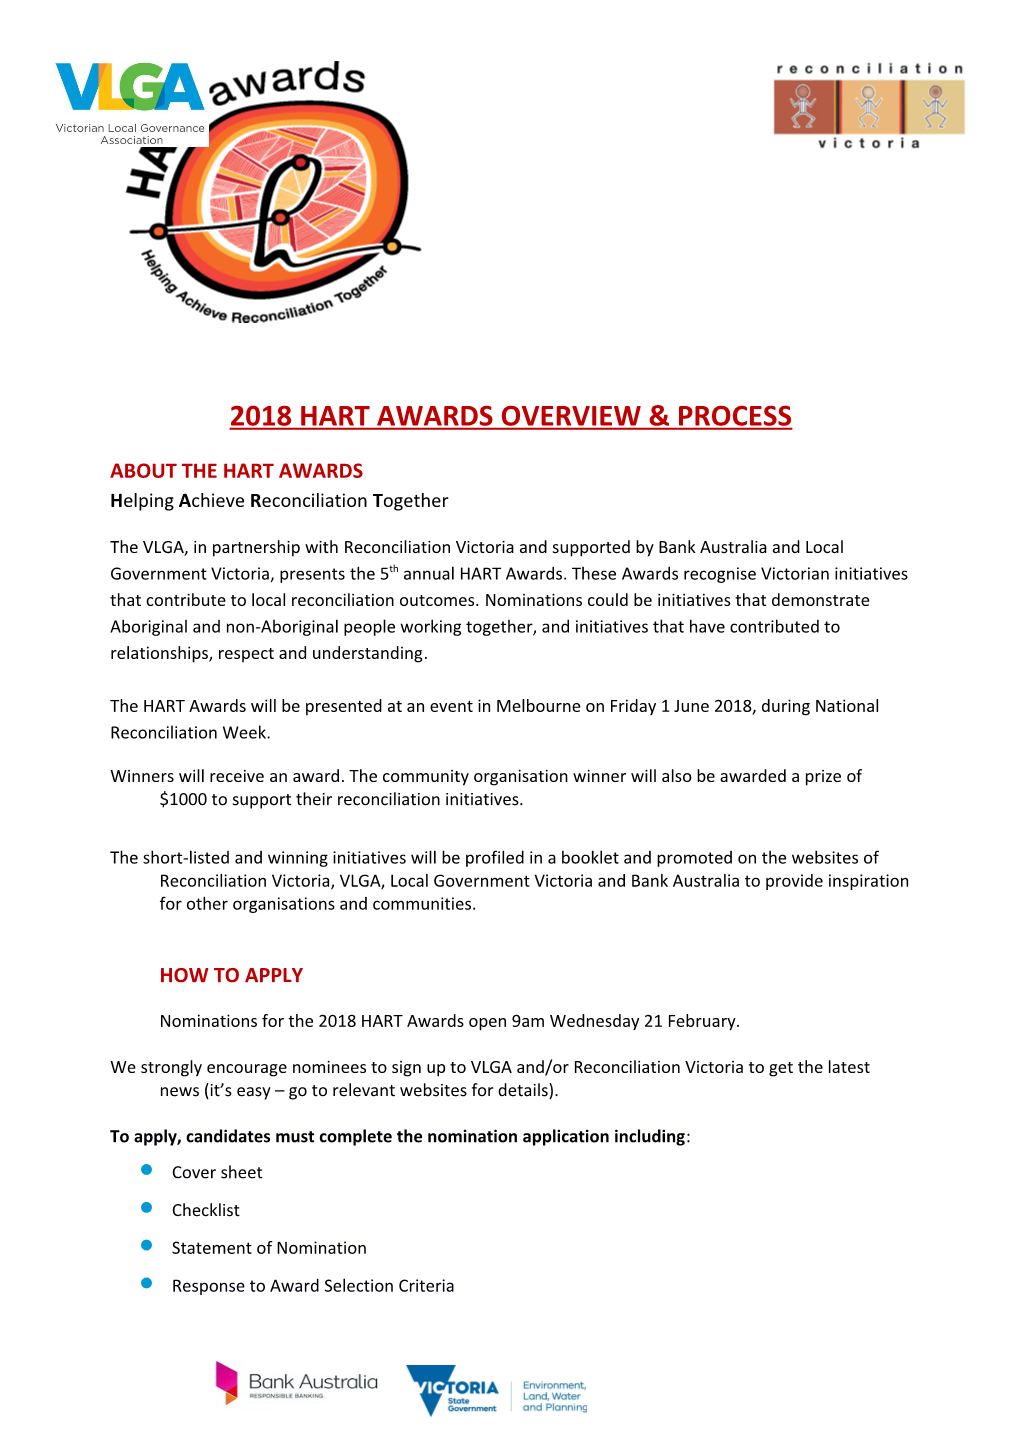 2018 Hart Awards Overview & Process